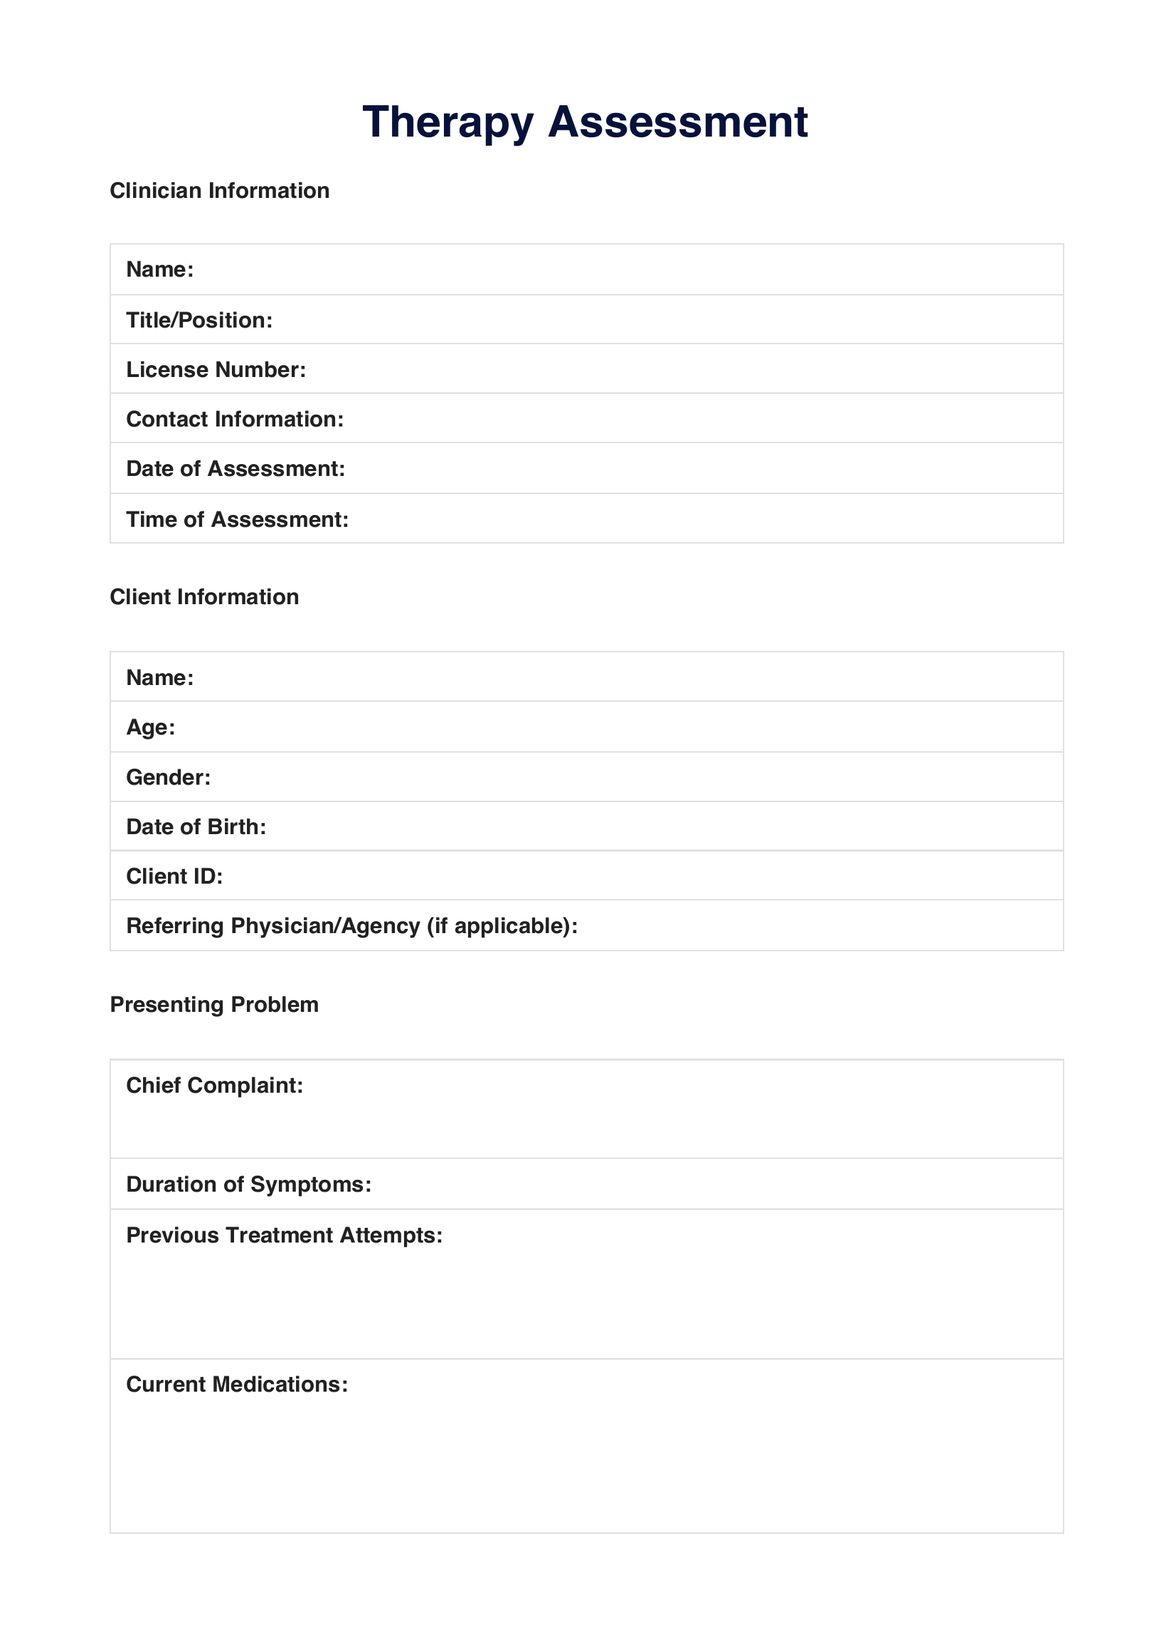 Therapy Assessment PDF Example